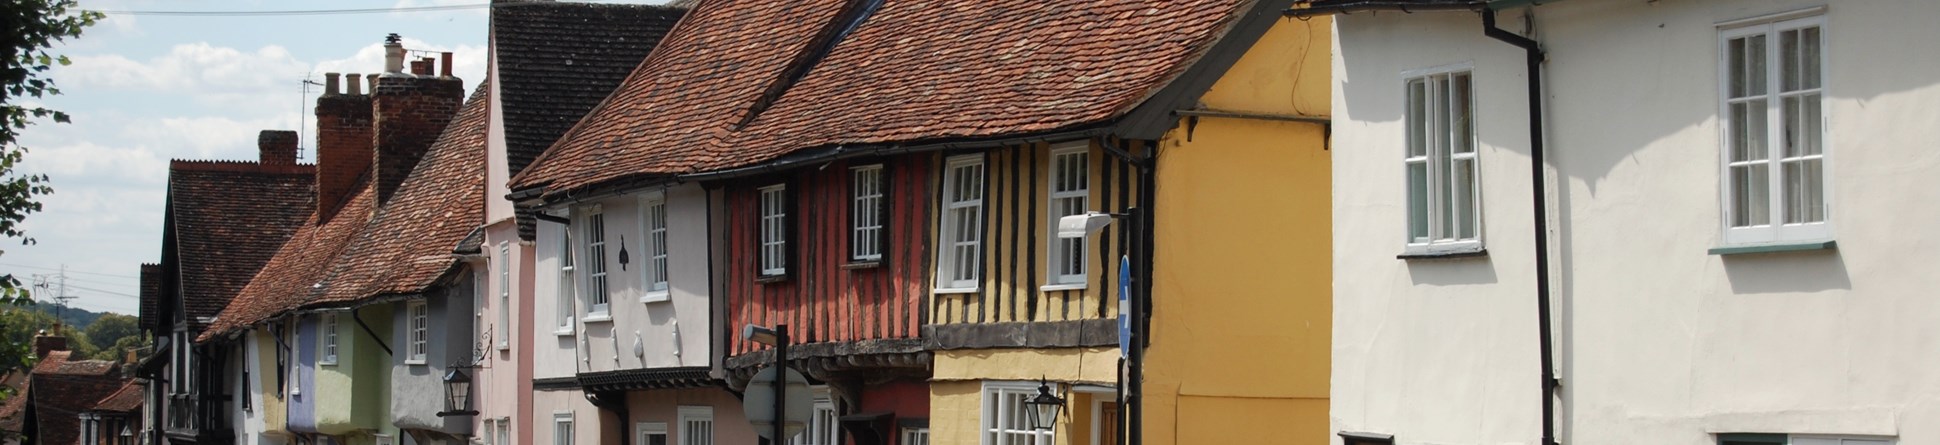 View of street with historic houses, Saffron Walden, Essex.